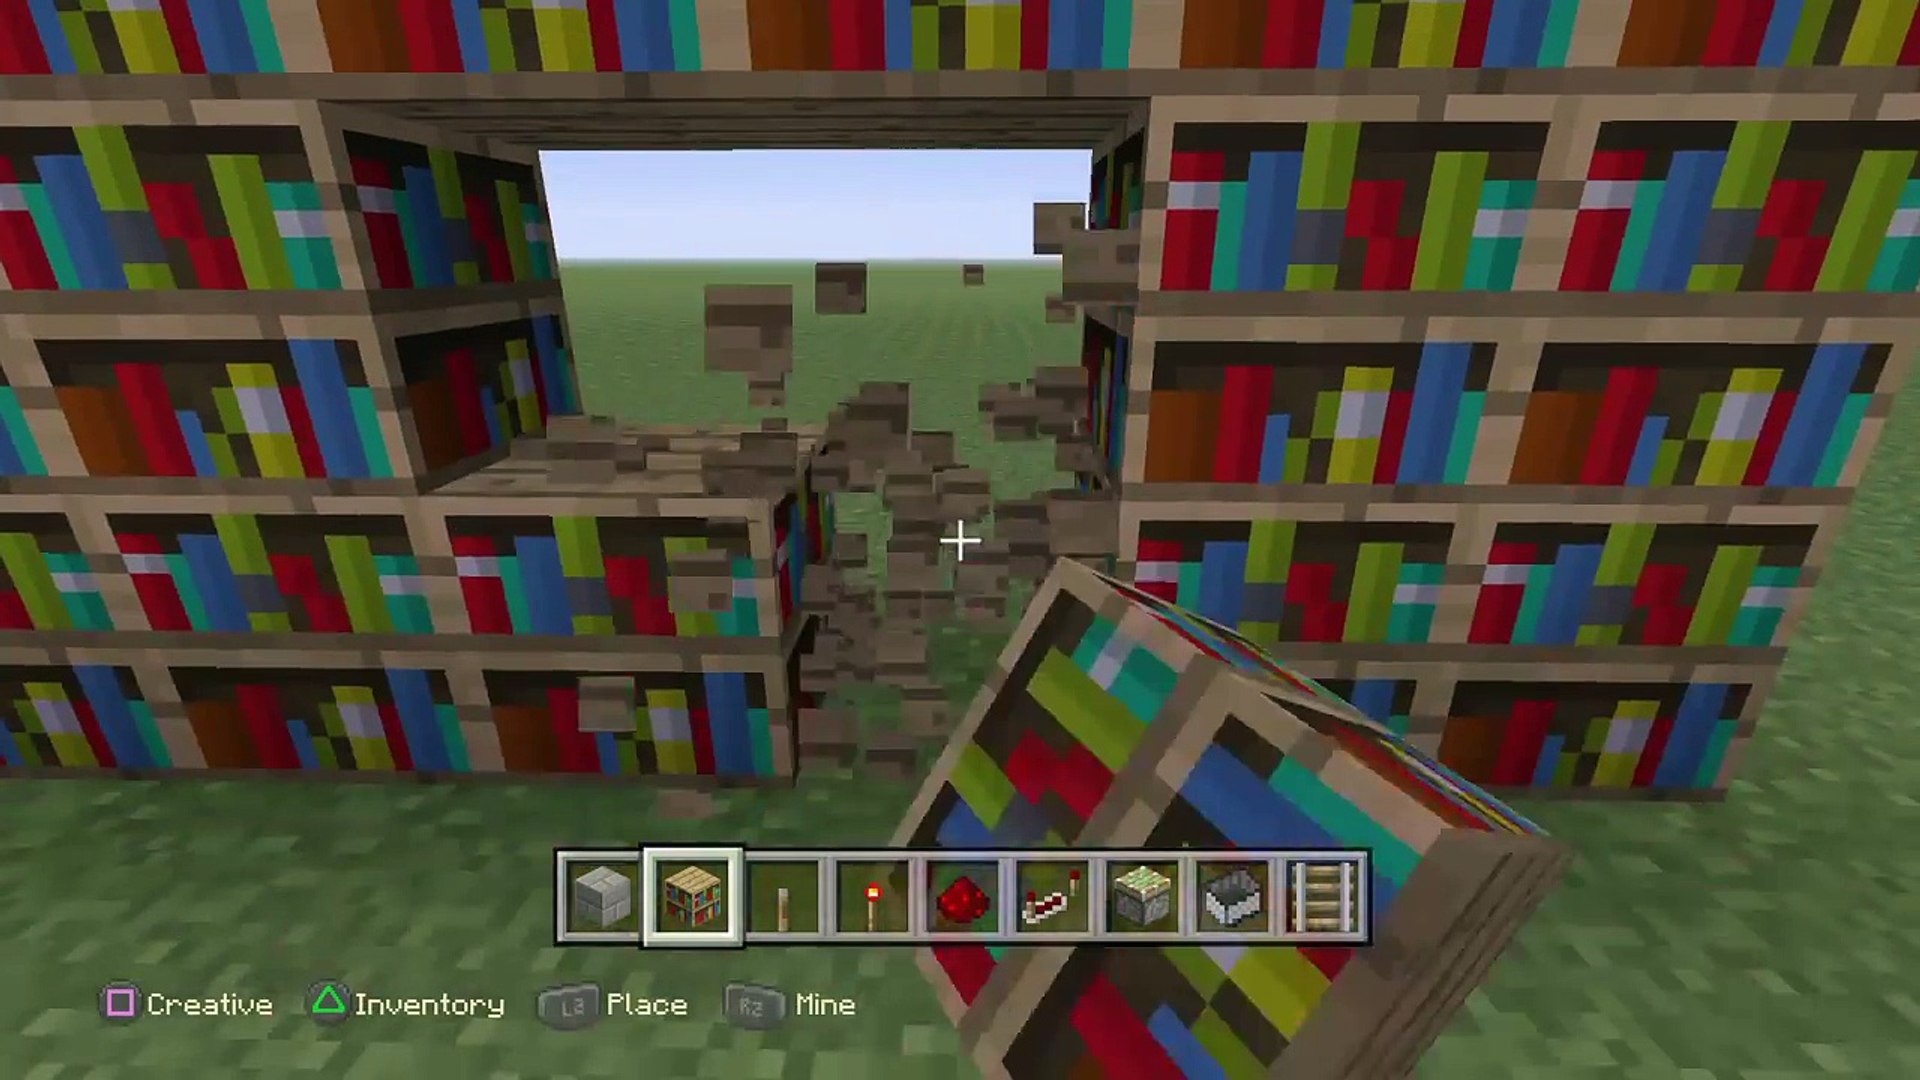 How To Build A Secret Bookcase Entrance In Minecraft Video